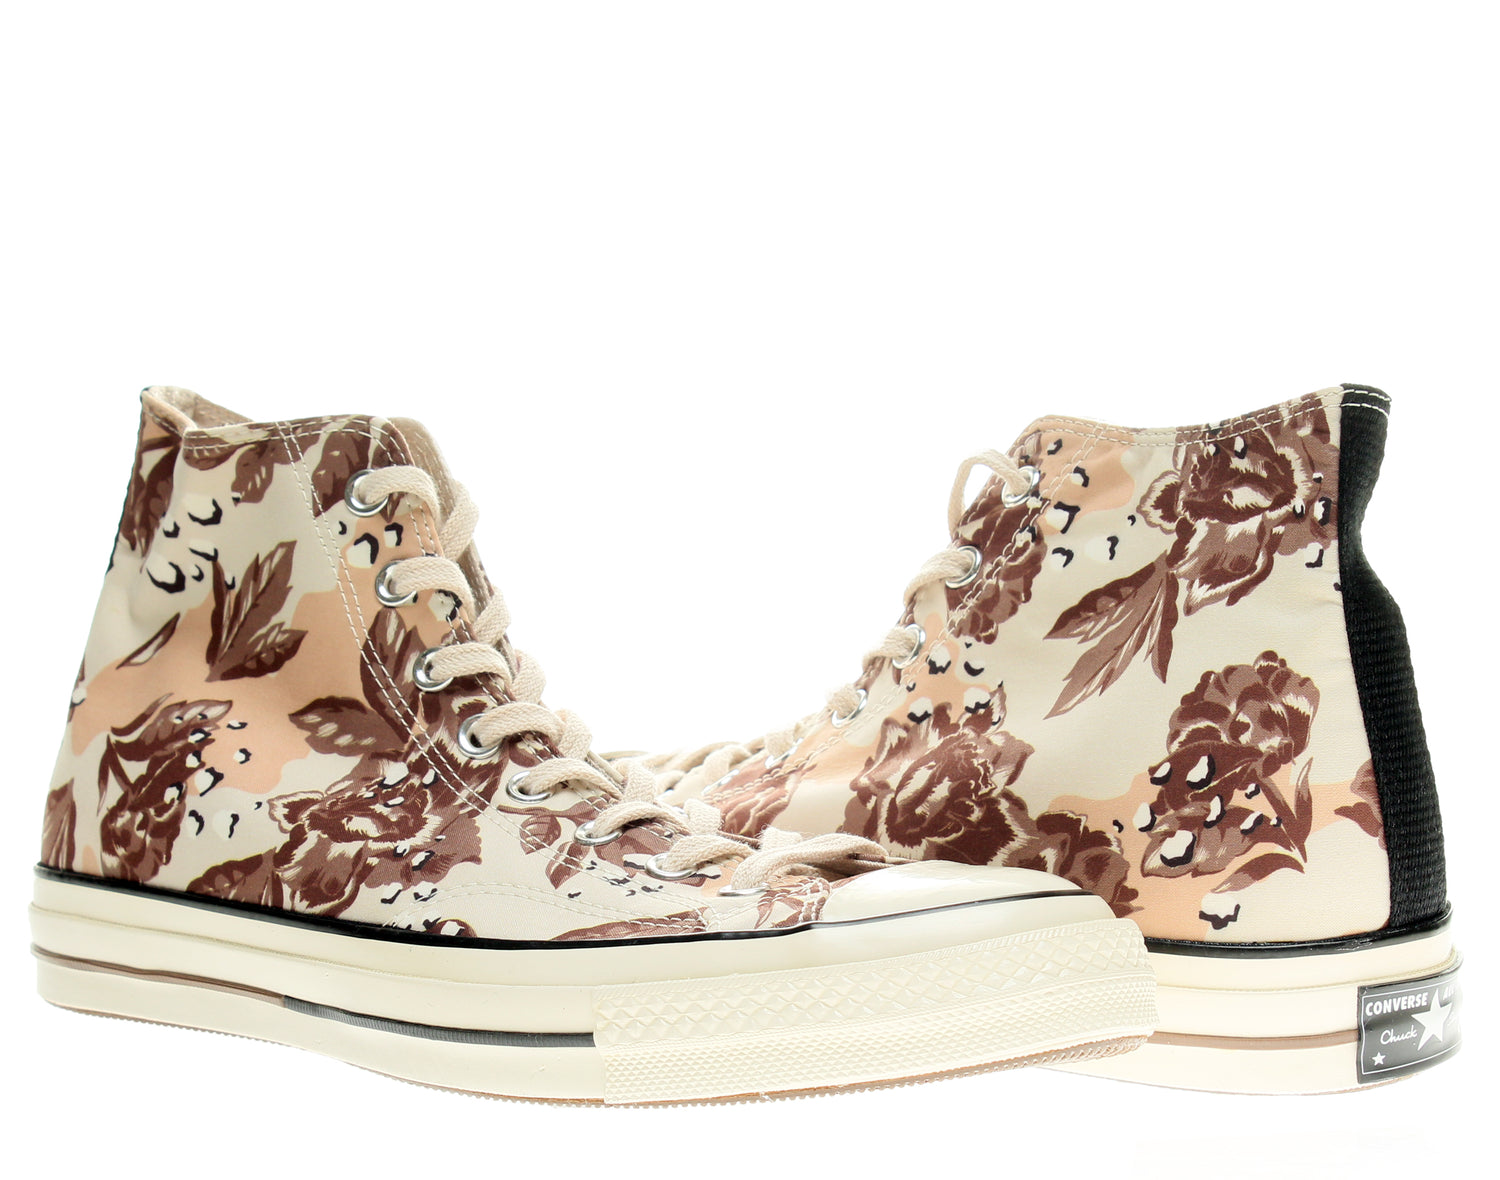 Converse Chuck Taylor All Star 1970 Floral High Top Sneakers